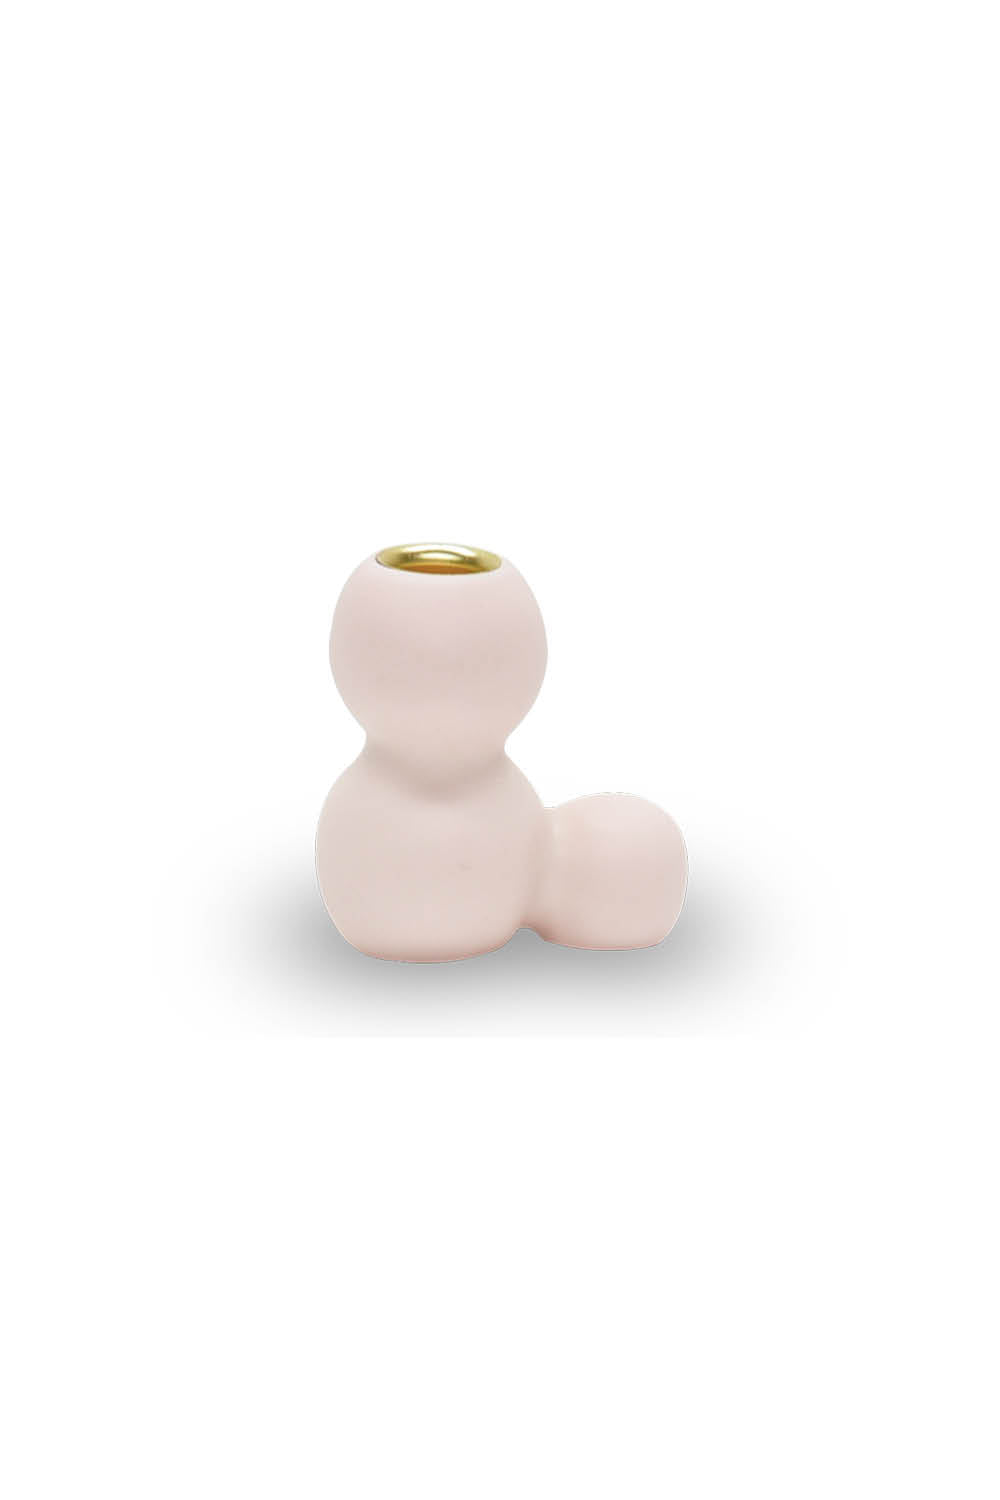 BUBBLE Small Candleholder in Pale Rose